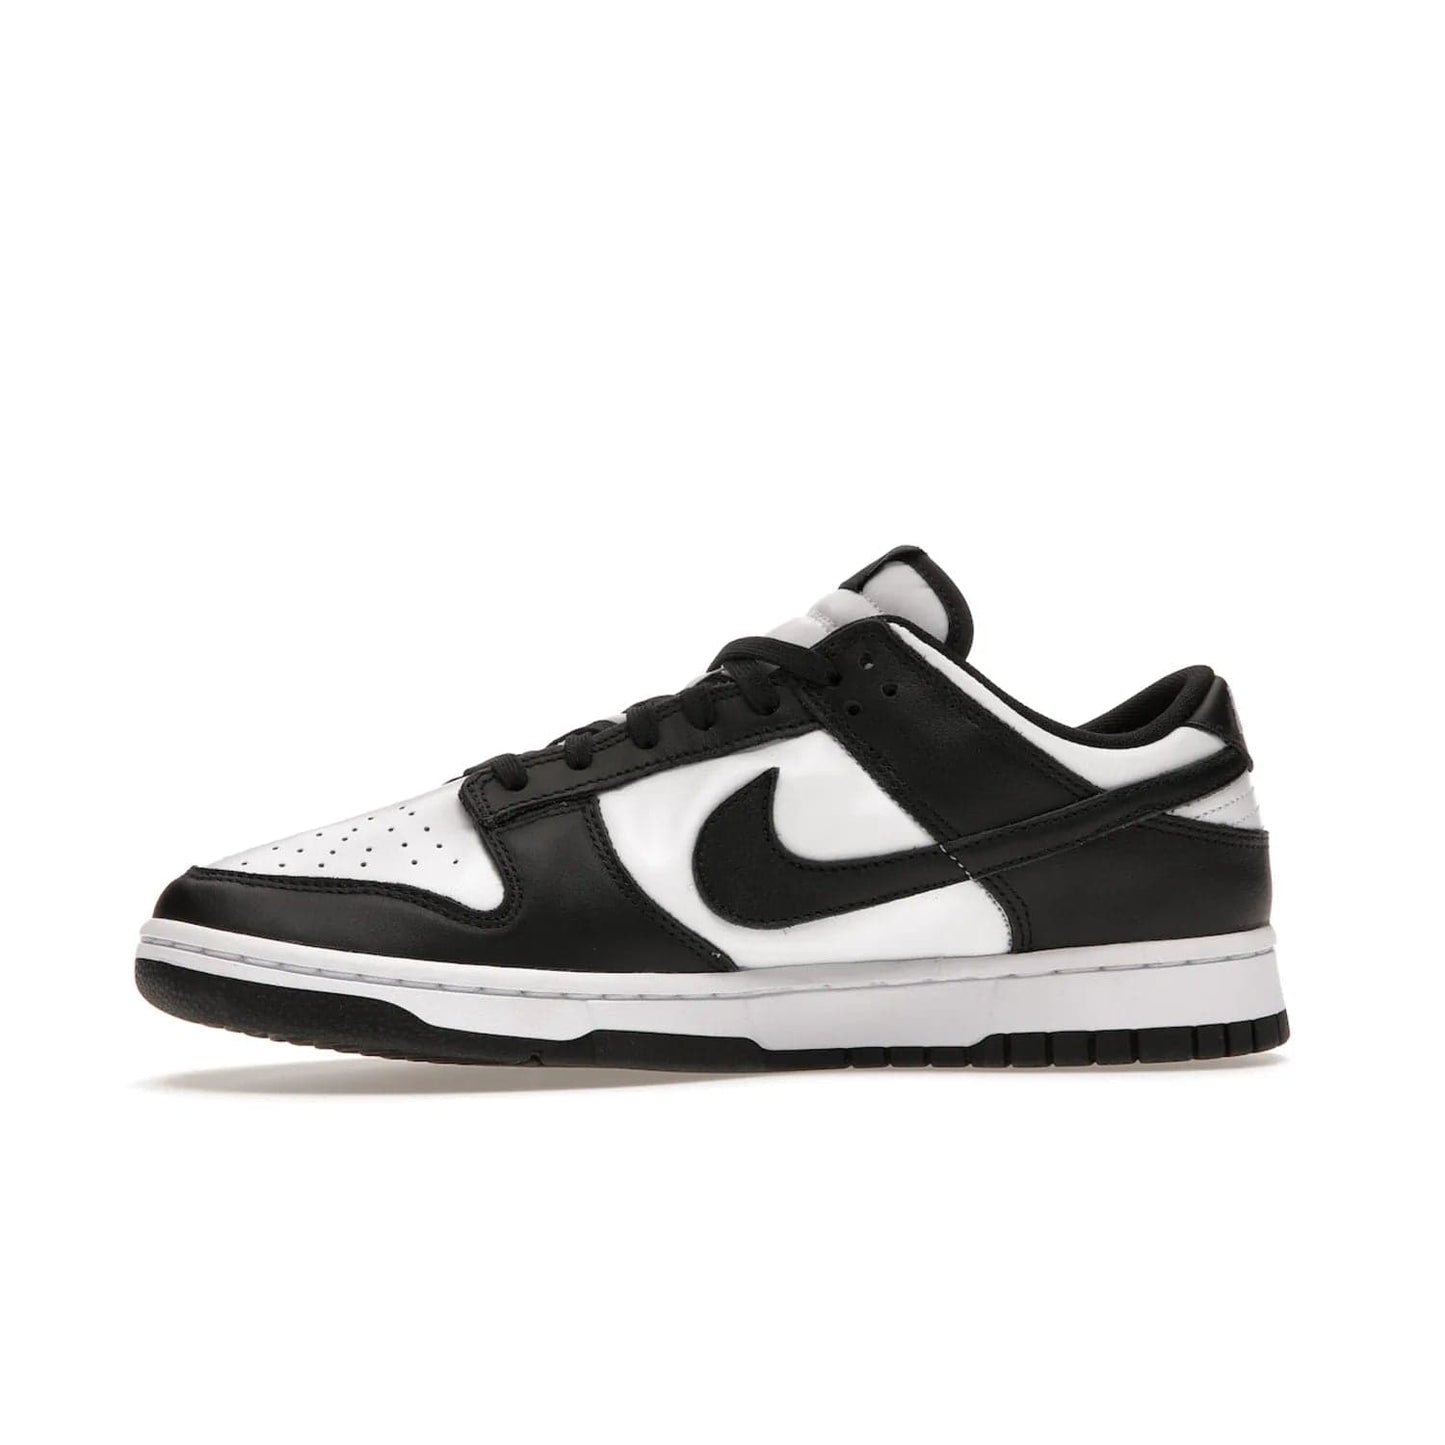 Nike Dunk Low Retro White Black Panda (2021) - Image 18 - Only at www.BallersClubKickz.com - Shop the Nike Dunk Low Retro White Black for classic styling featuring white leather with black leather overlays and classic Nike branding. Released in 2021, this timeless design offers a white midsole and black outsole for a stylish look. Shop all the Nike Dunks & rock this classic look.